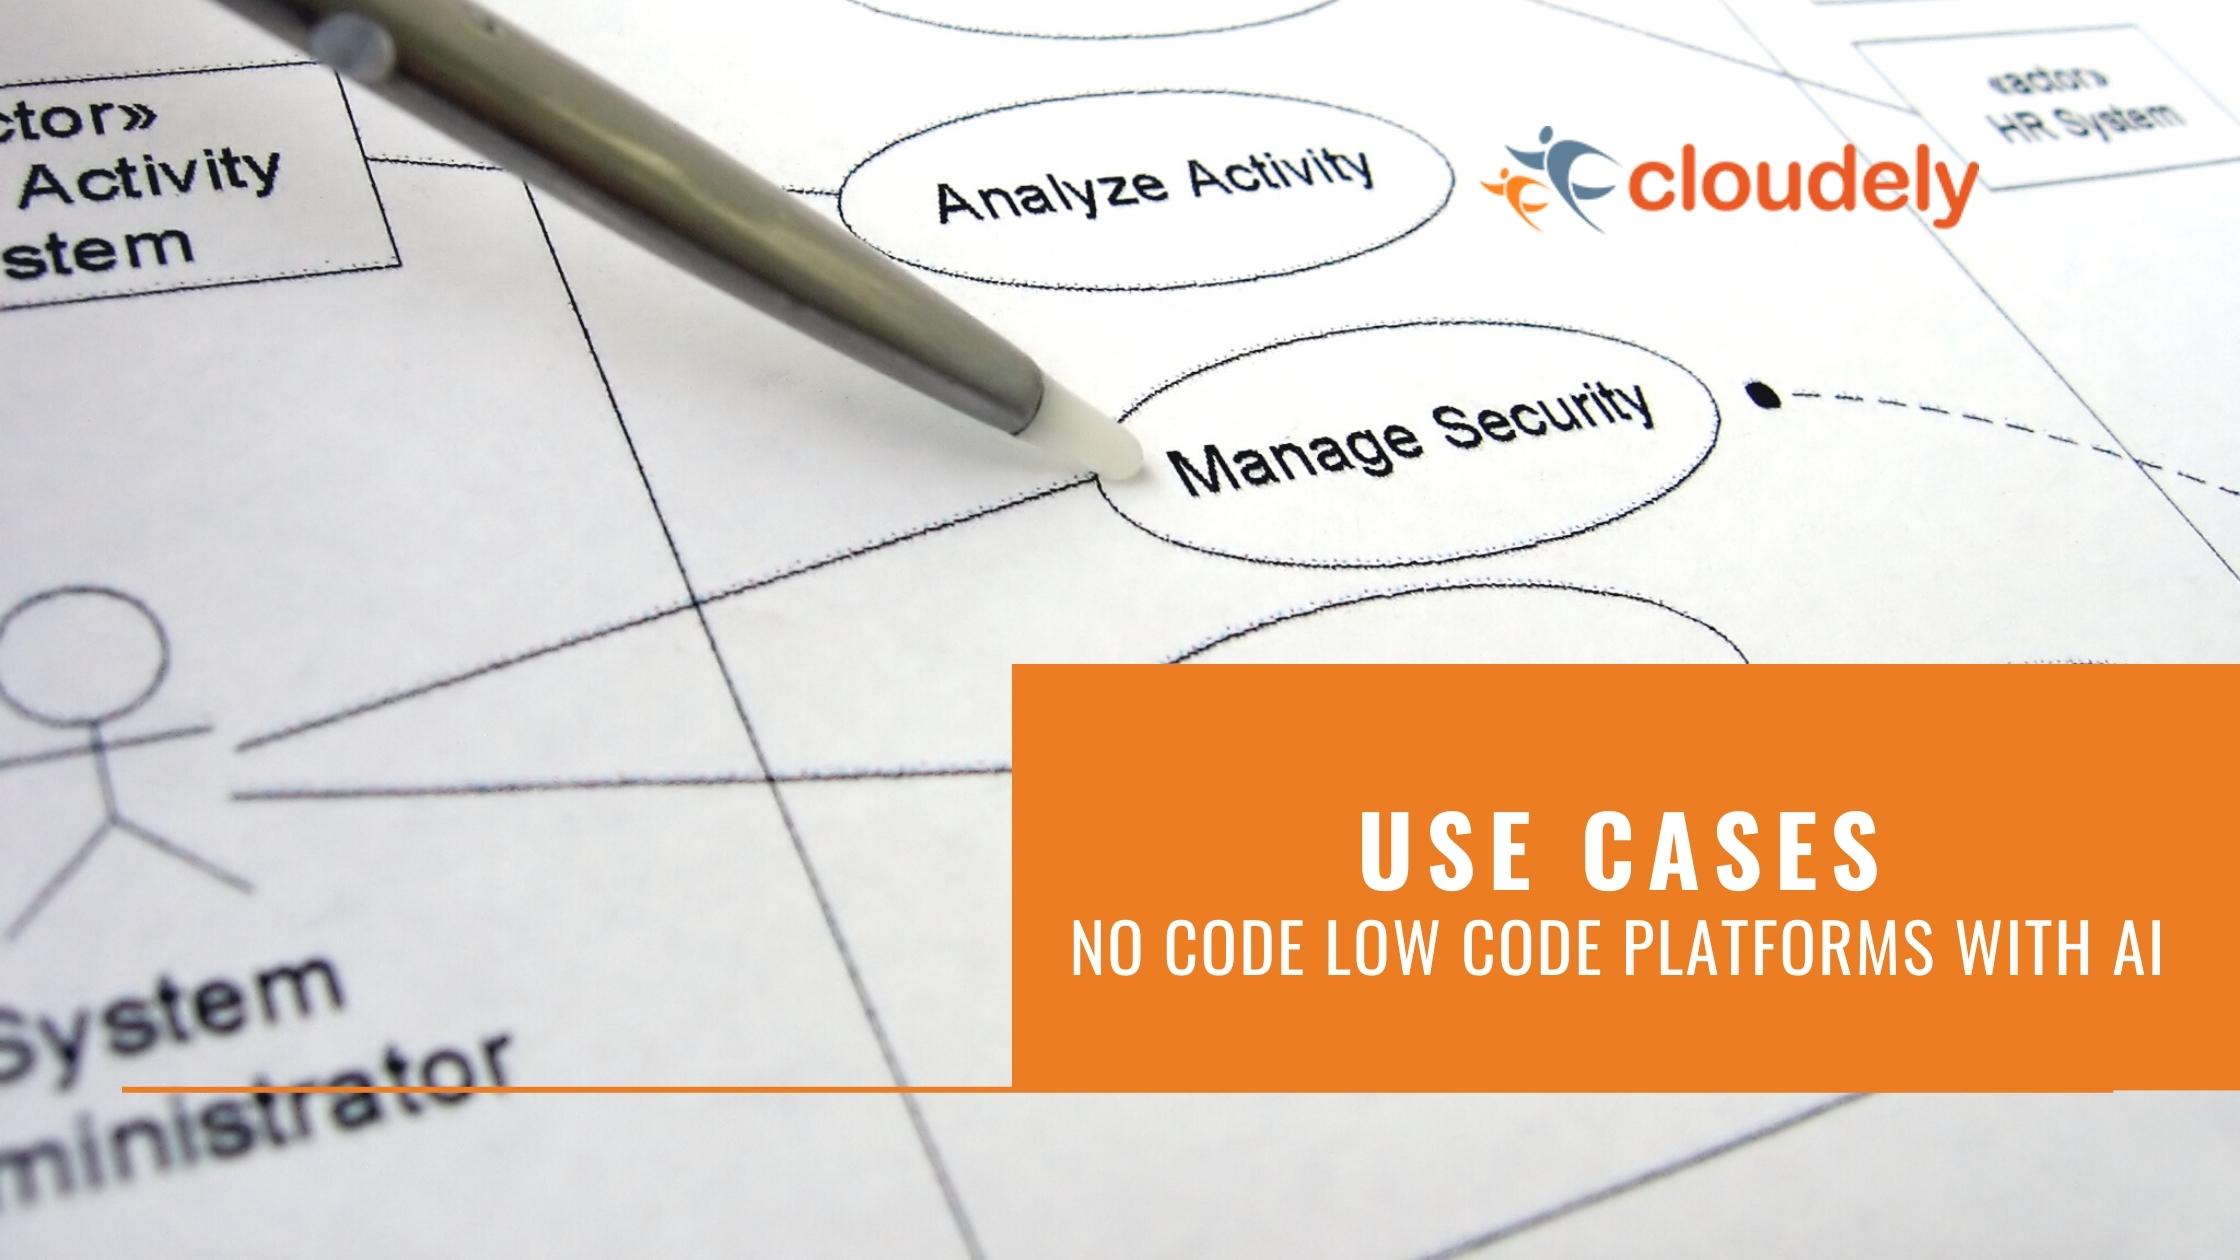 No code low code platforms with AI use cases